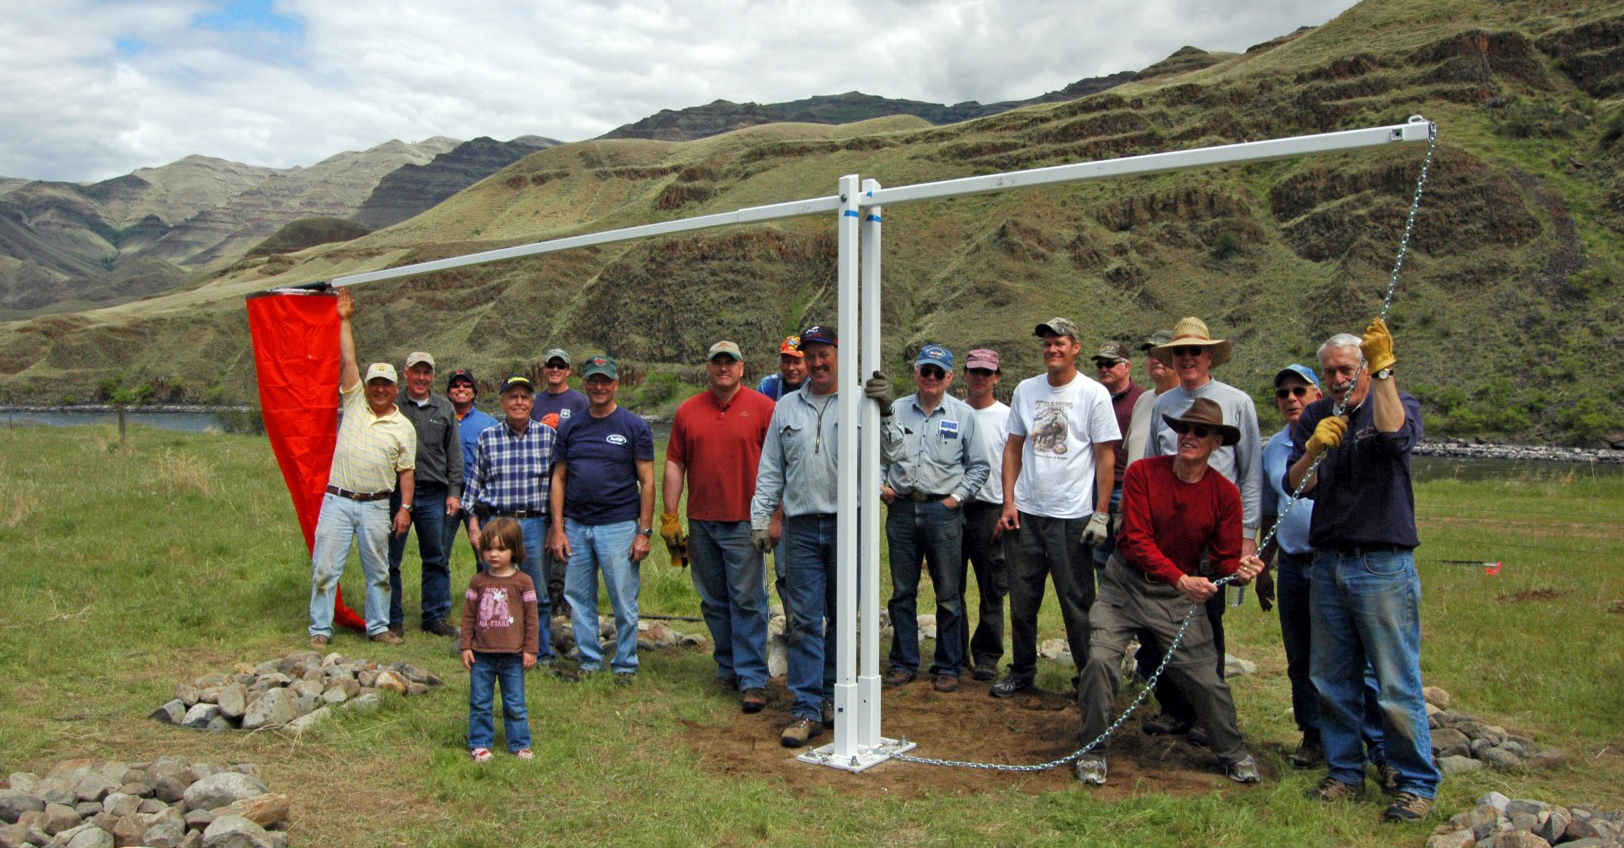 Much of the work to maintain the Hells Canyon airstrips is done by volunteers like these from the Idaho and Oregon pilot’s associations, who, in cooperation with the Idaho Division of Aeronautics, U.S. Forest Service, and others, installed a new windsock at Dug Bar in April of 2012. Photo by Crista Worthy.